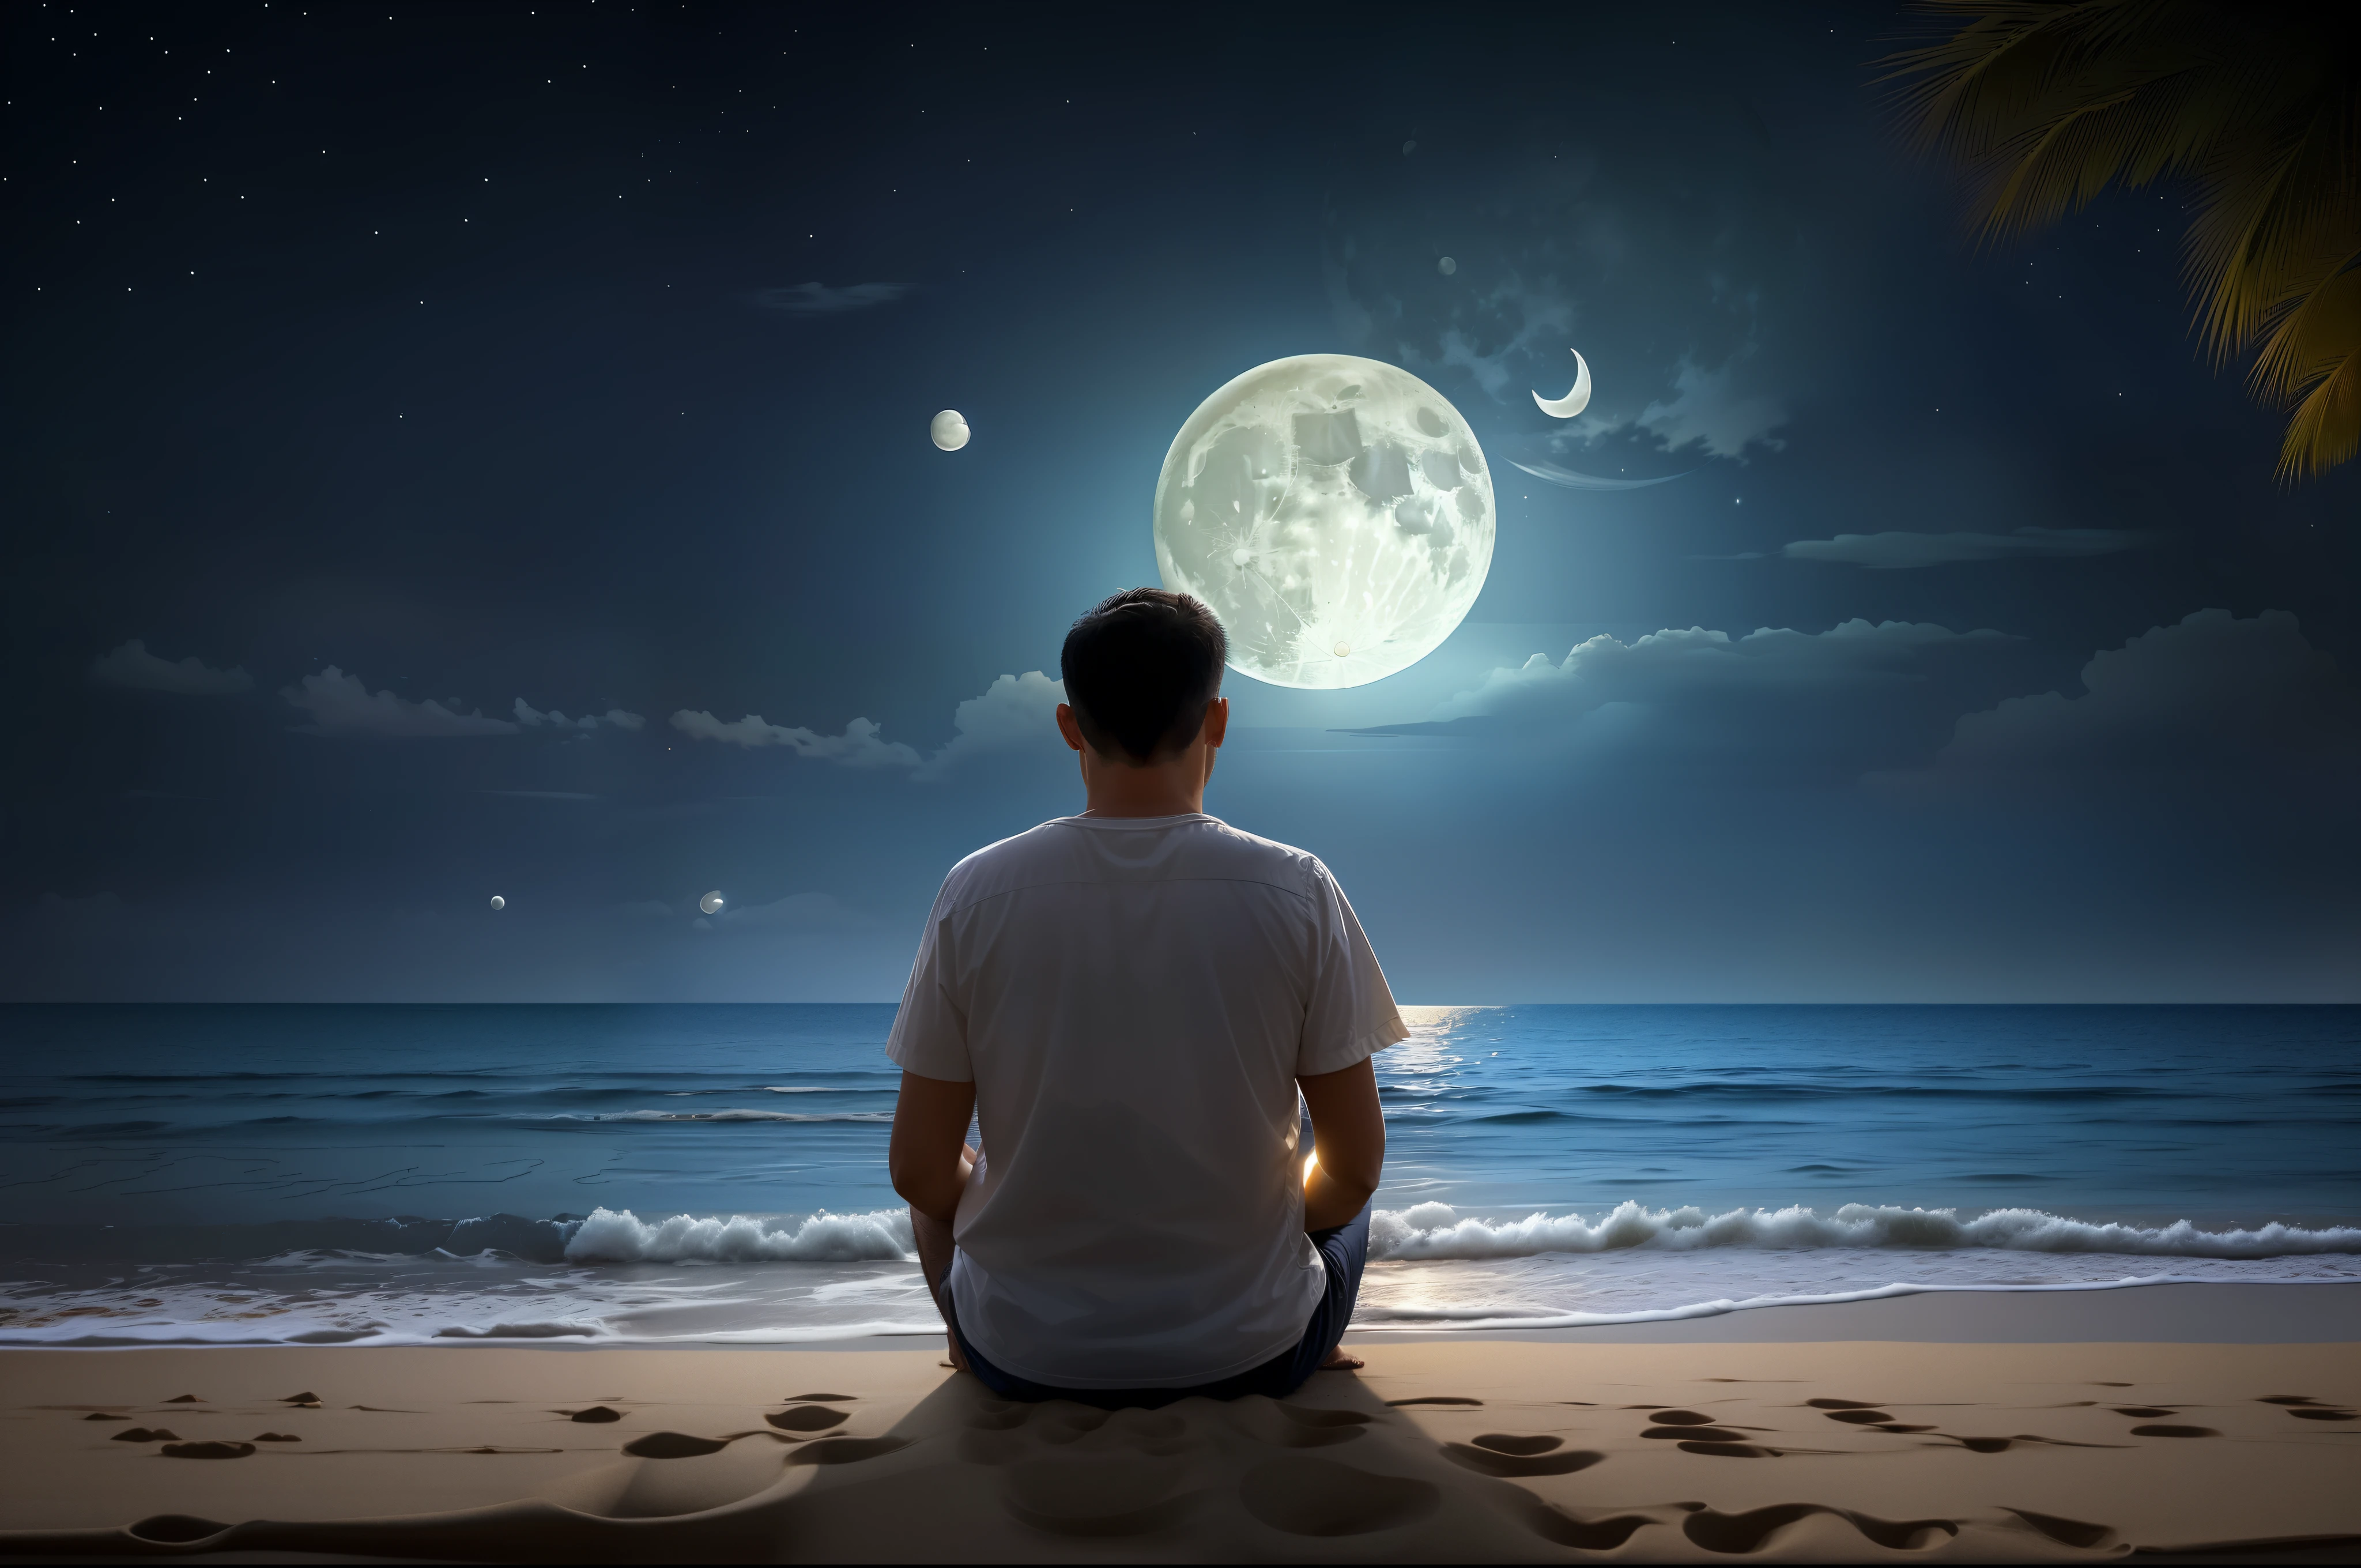 there is a man sitting on the beach watching the moon, looking at the full moon, the moon cast on the man, sitting on a moon, looking at the moon, sitting on the beach at night, moon behind him, calm night. digital illustration, his mind contemplating eternity, in front of a full moon, in front of a big moon, beautiful moonlight night